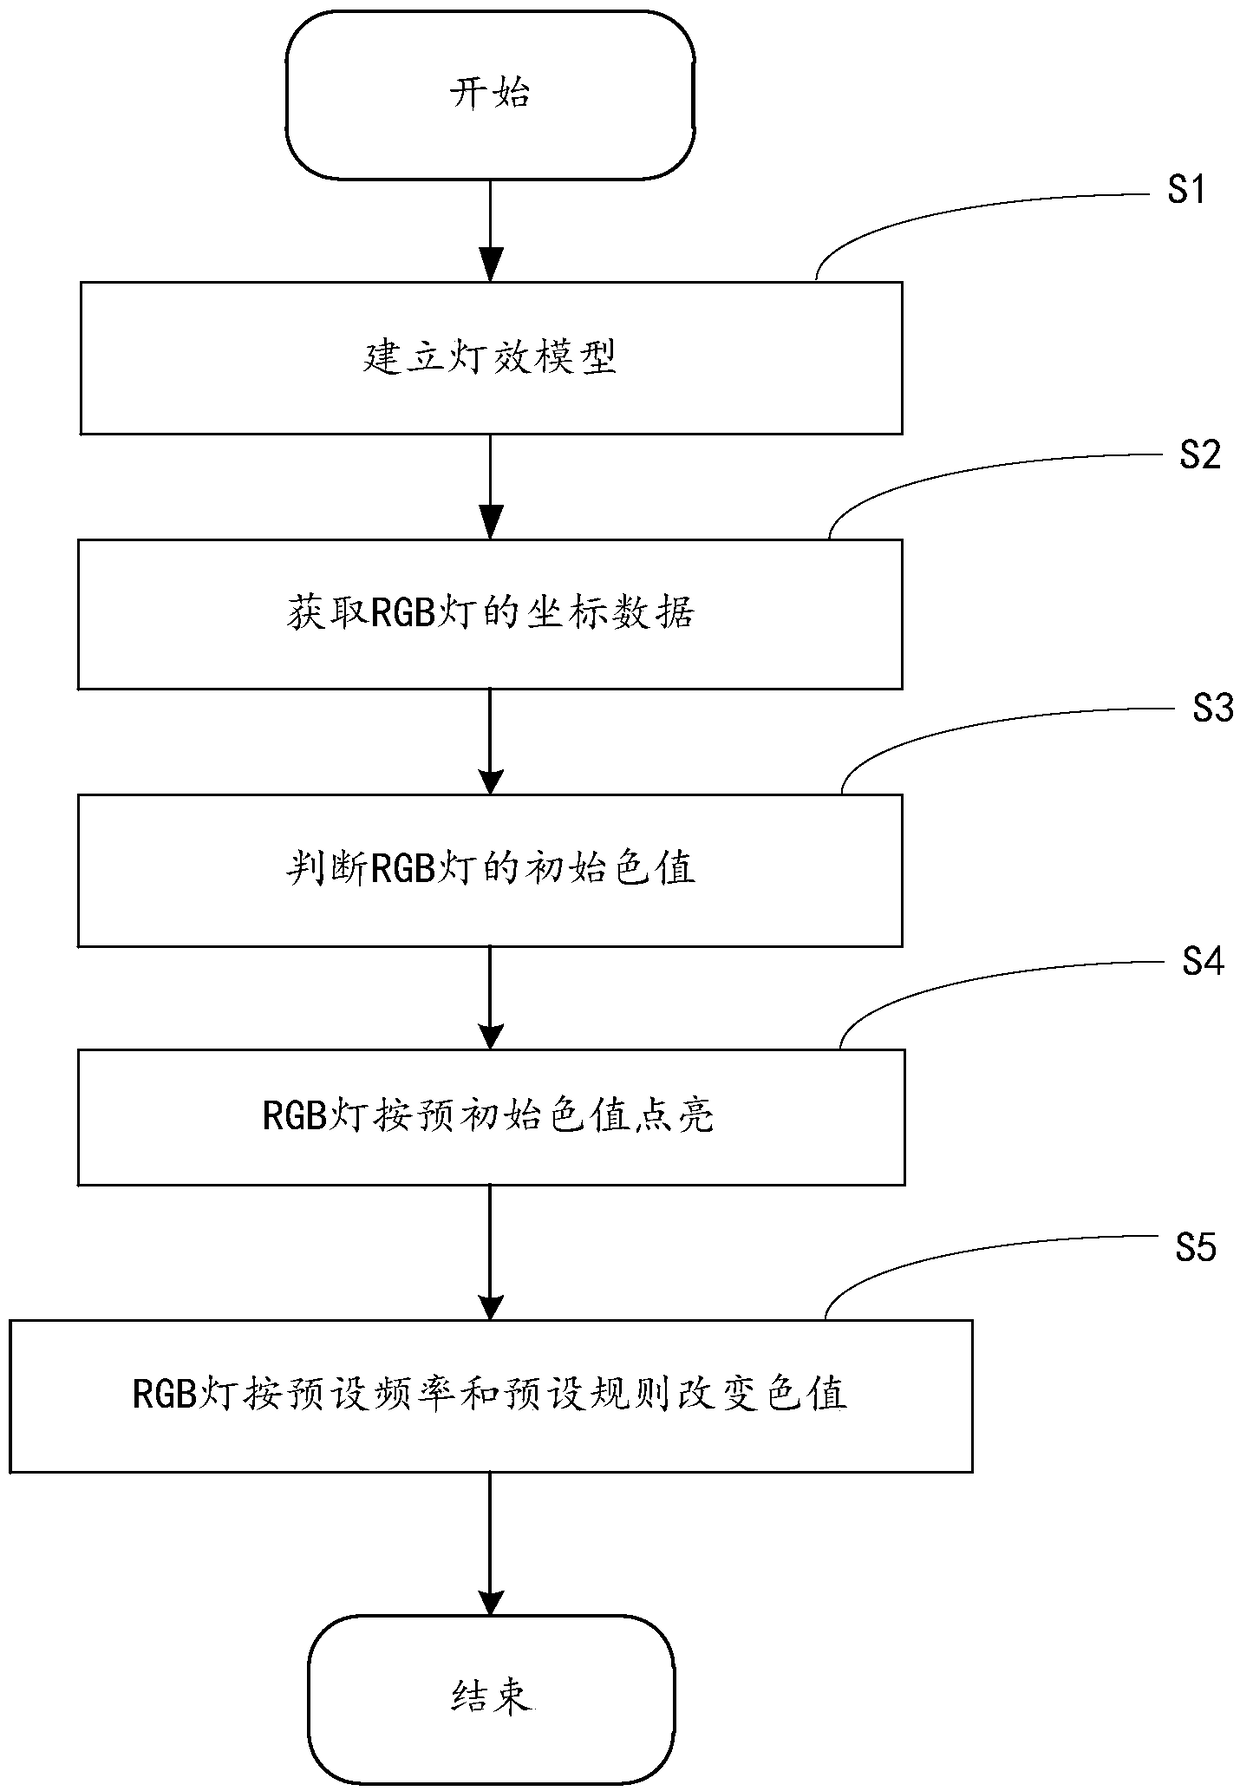 Keyboard lamp effect control method, computer device and computer readable storage medium